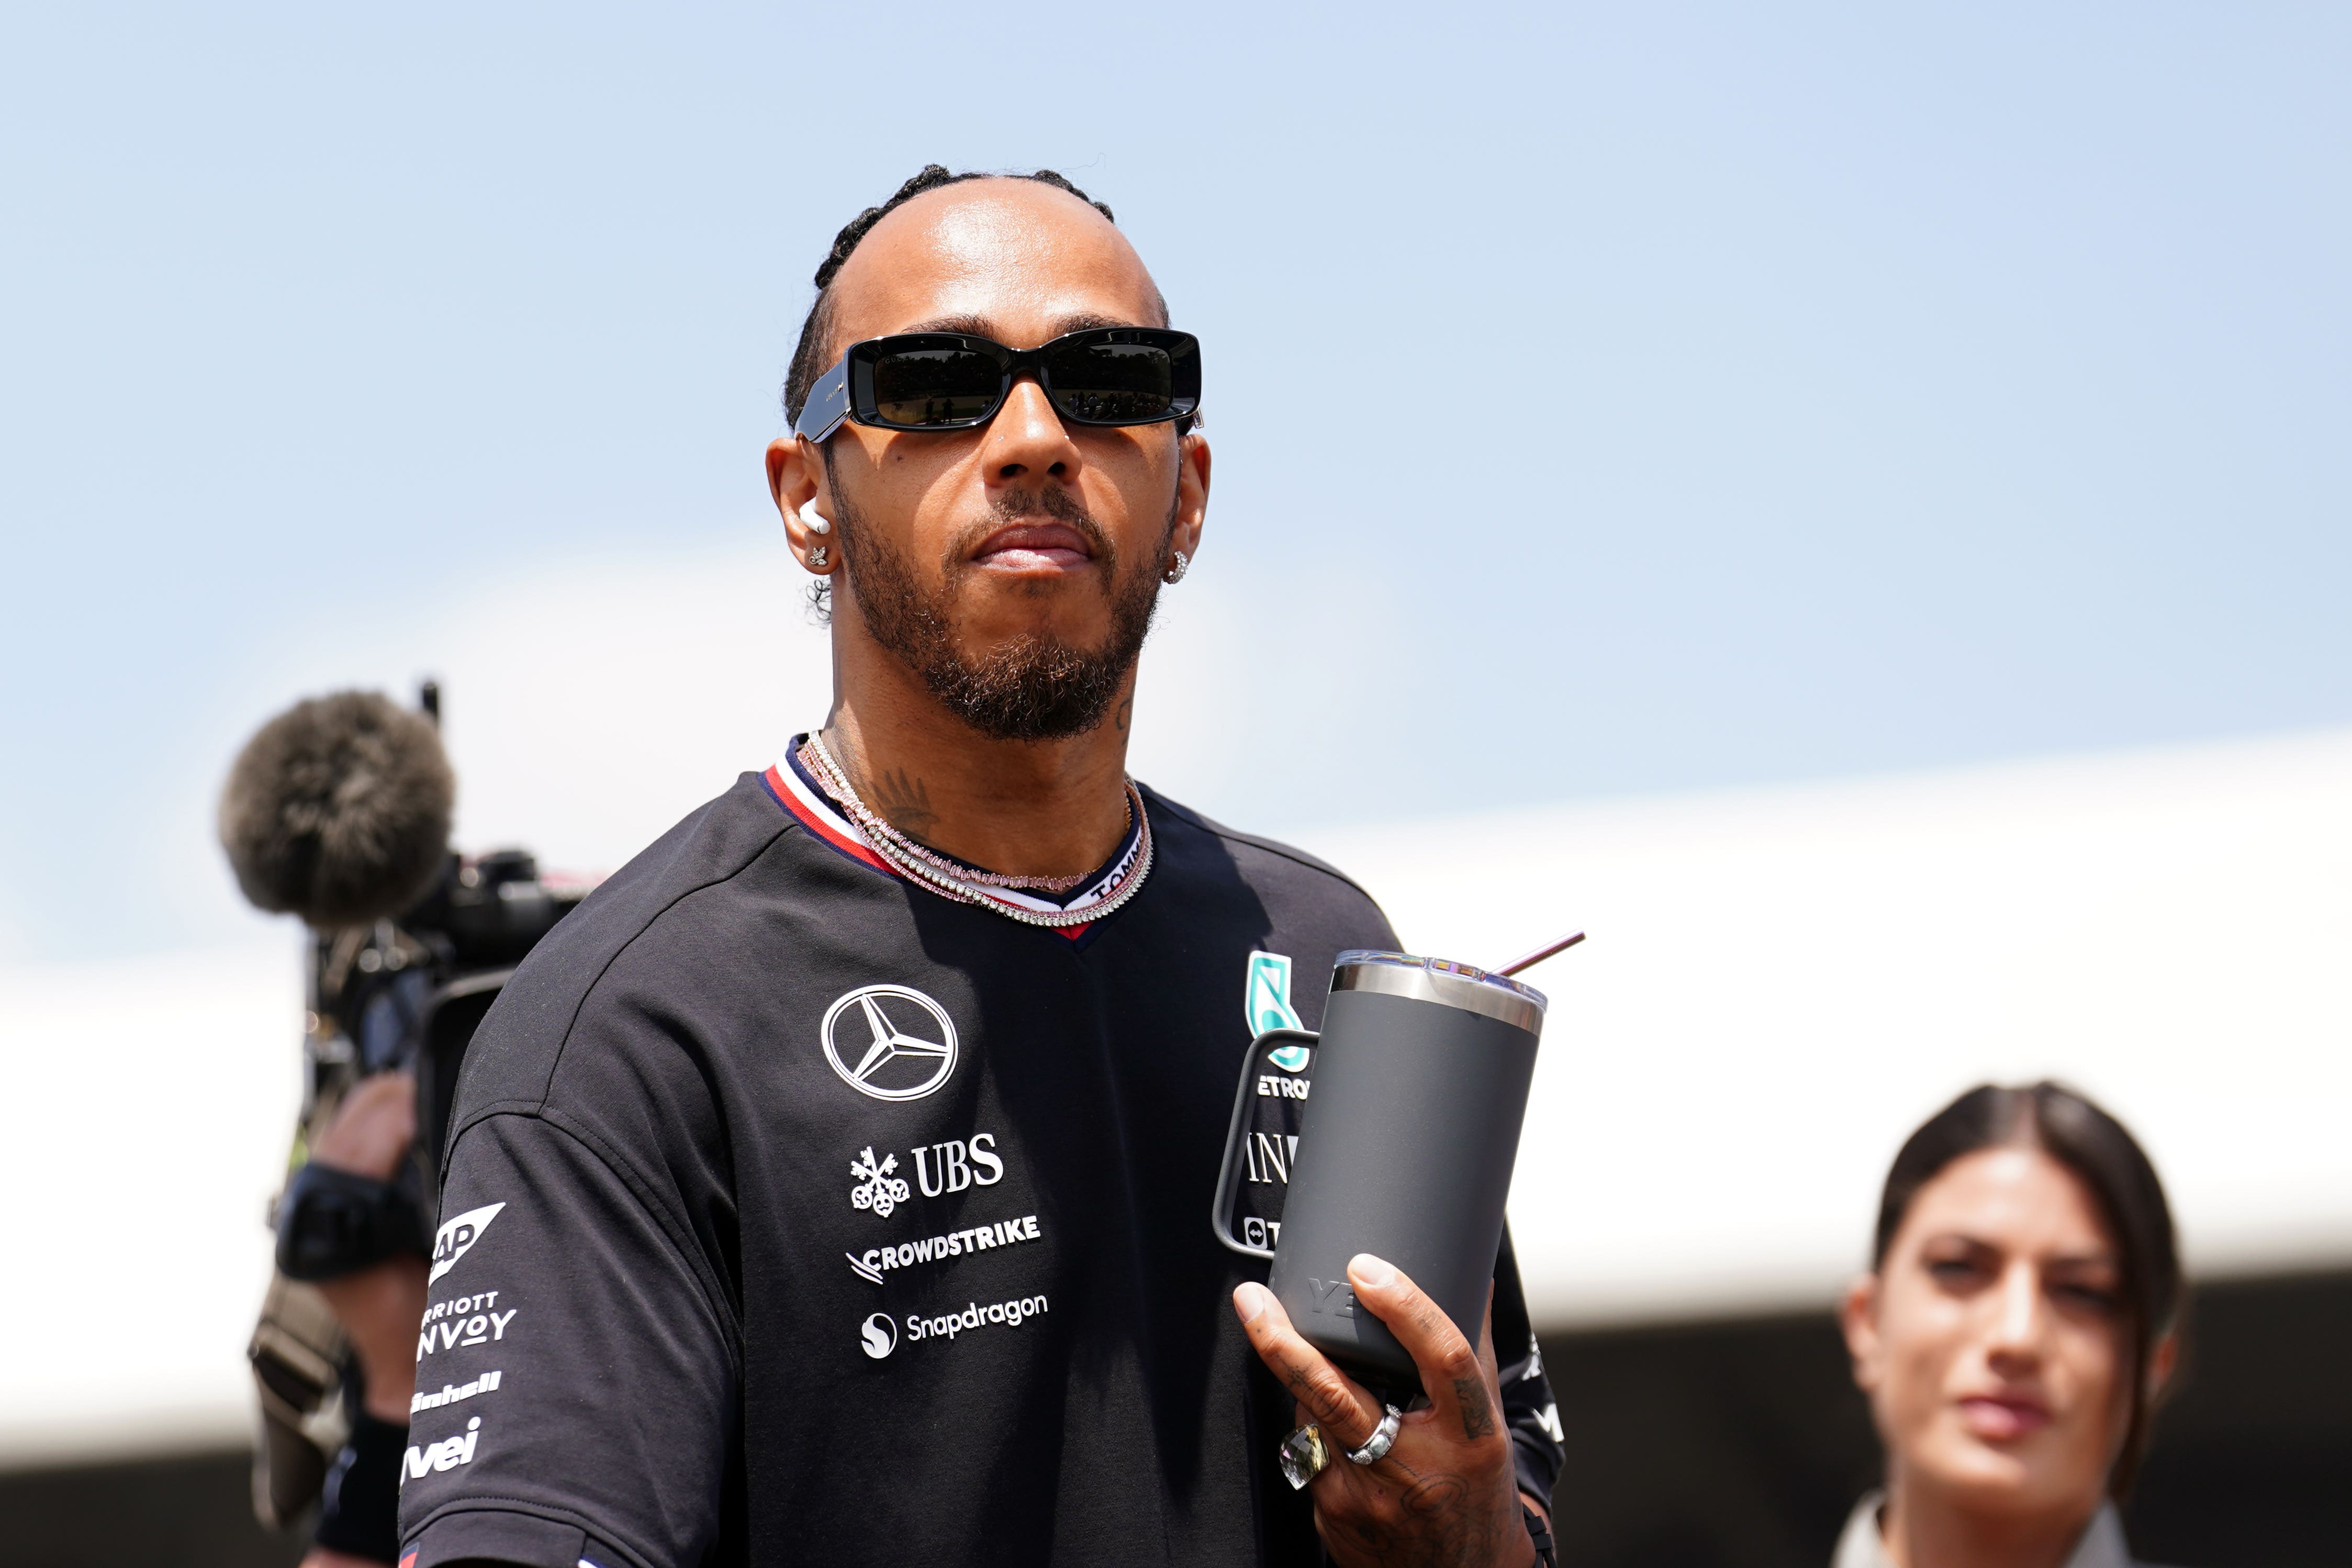 Lewis Hamilton called for ‘support not negativity’ in response to claims of sabotage at Mercedes (David Davies/PA)